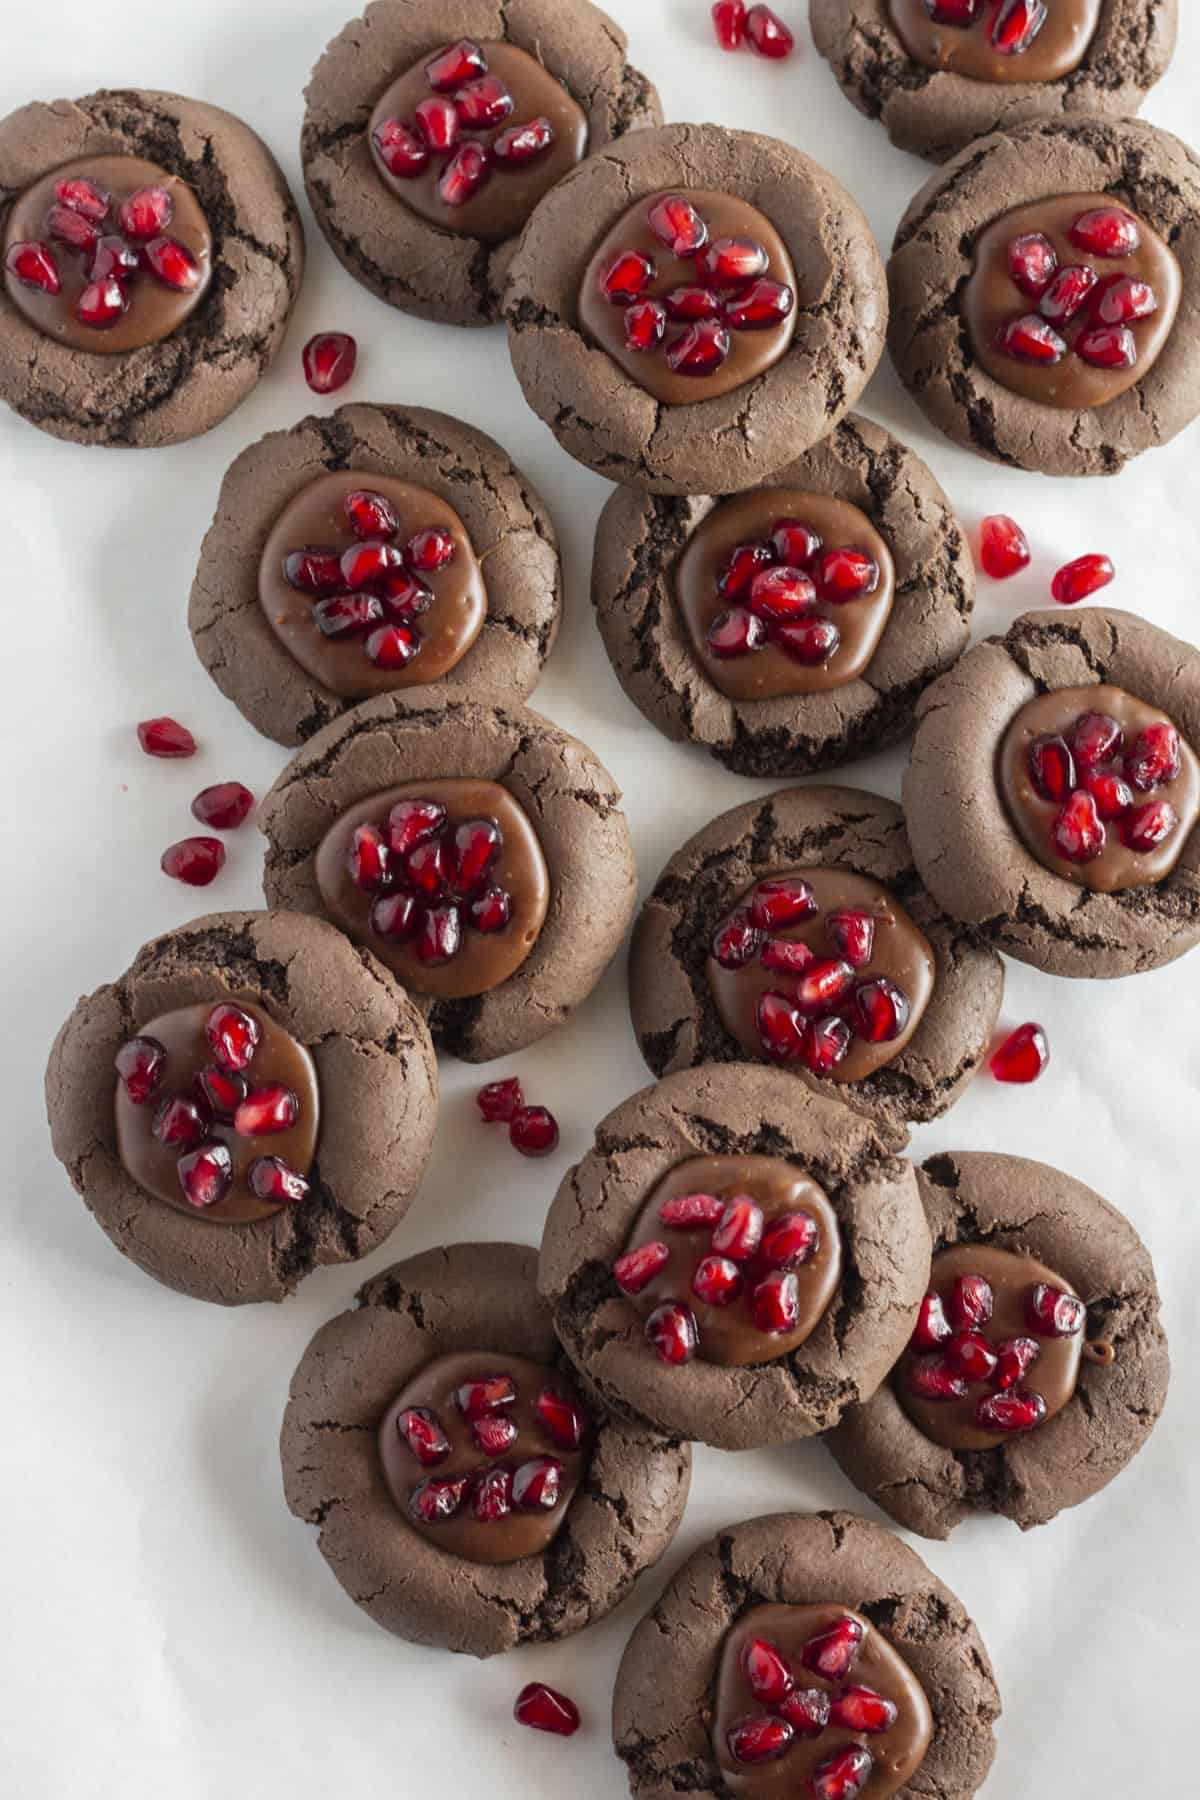 Looking down on a dozen chocolate pomegranate cookies.